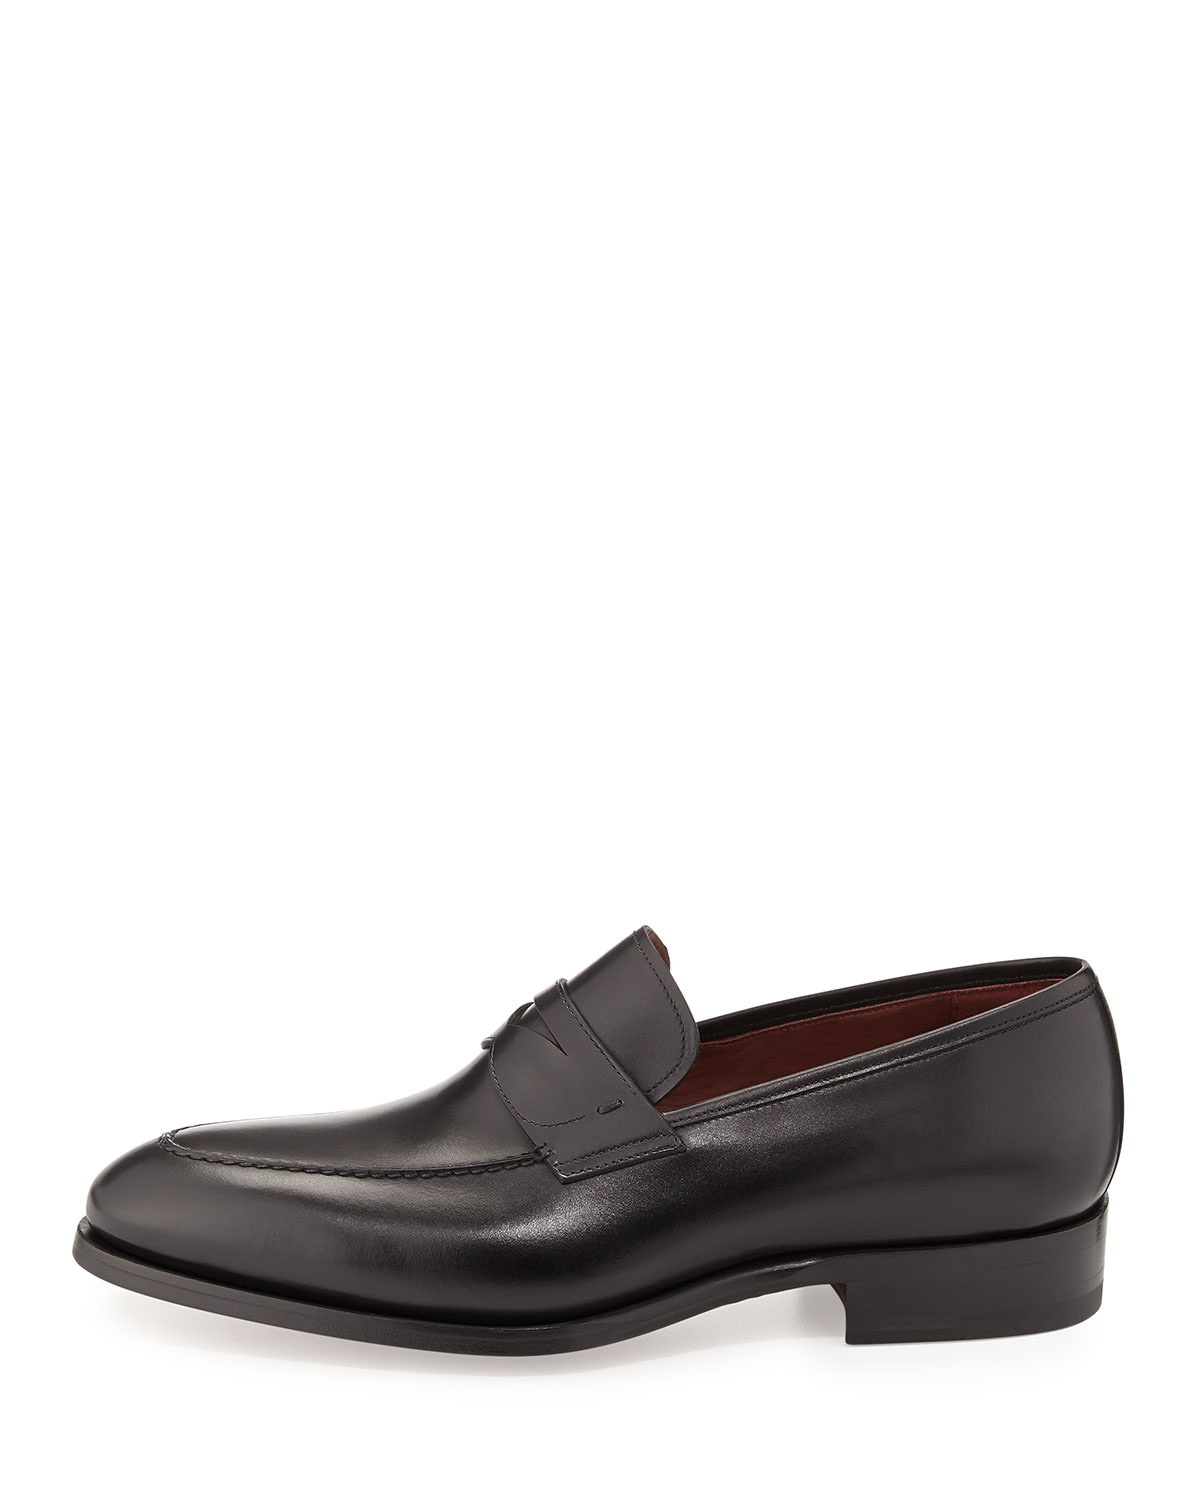 Lyst - Neiman Marcus Almond-toe Penny Loafer in Black for Men